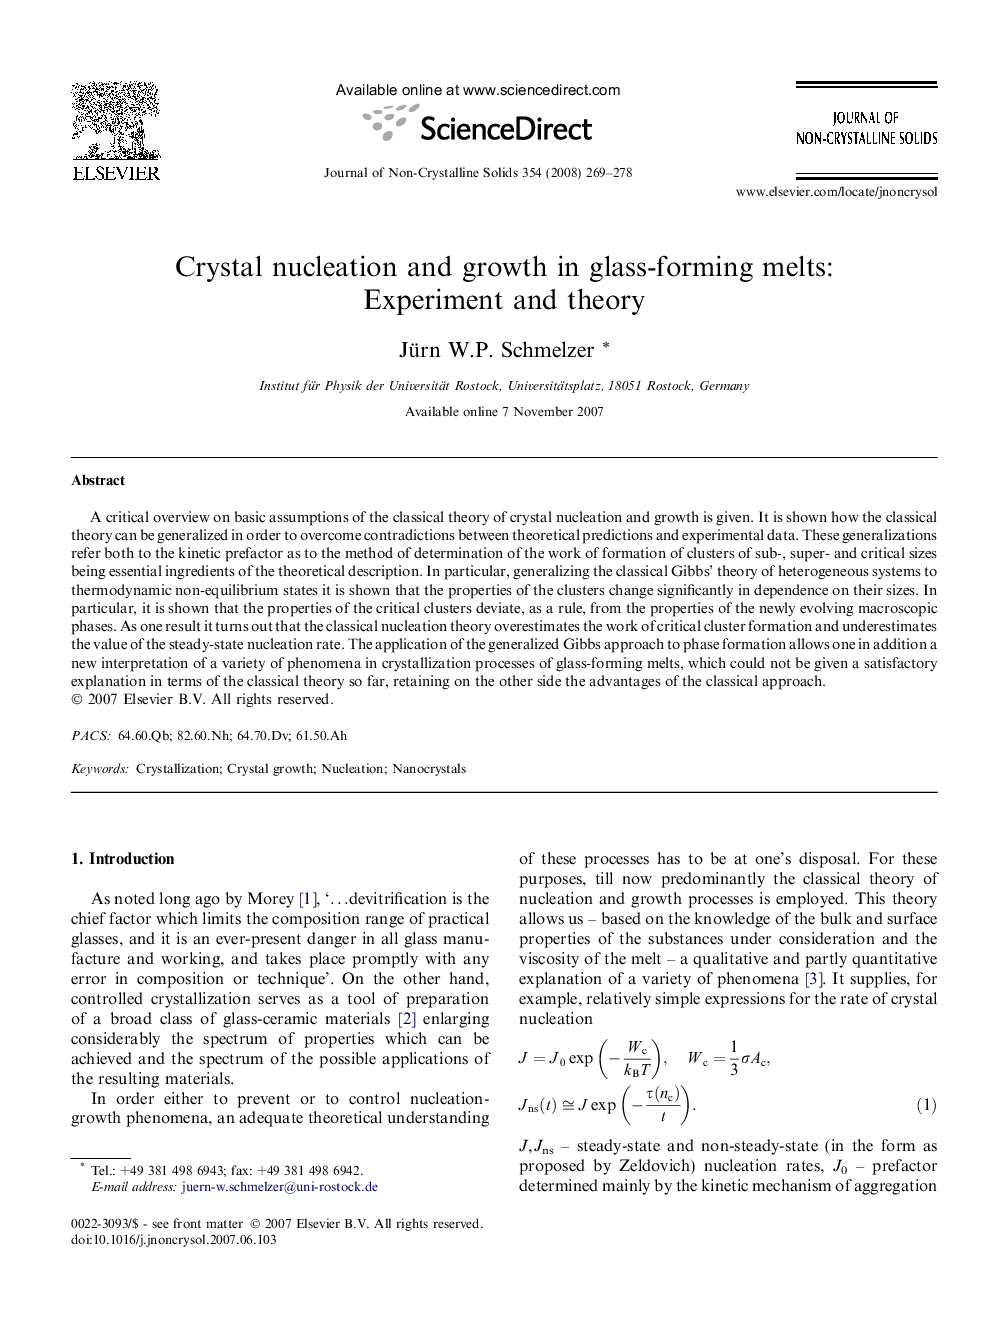 Crystal nucleation and growth in glass-forming melts: Experiment and theory